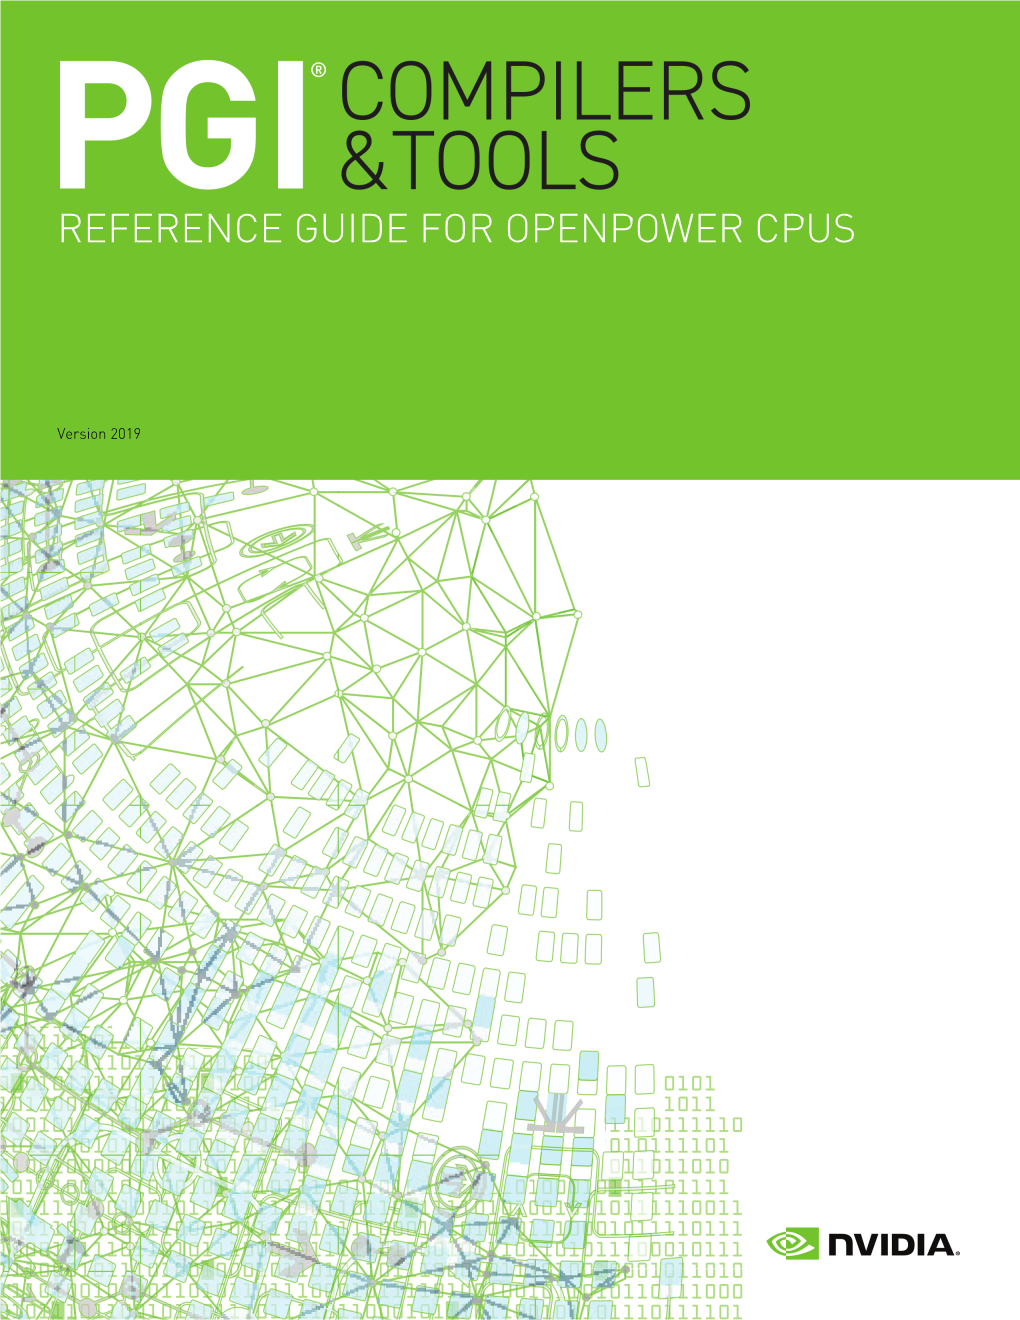 Reference Guide for Openpower Cpus